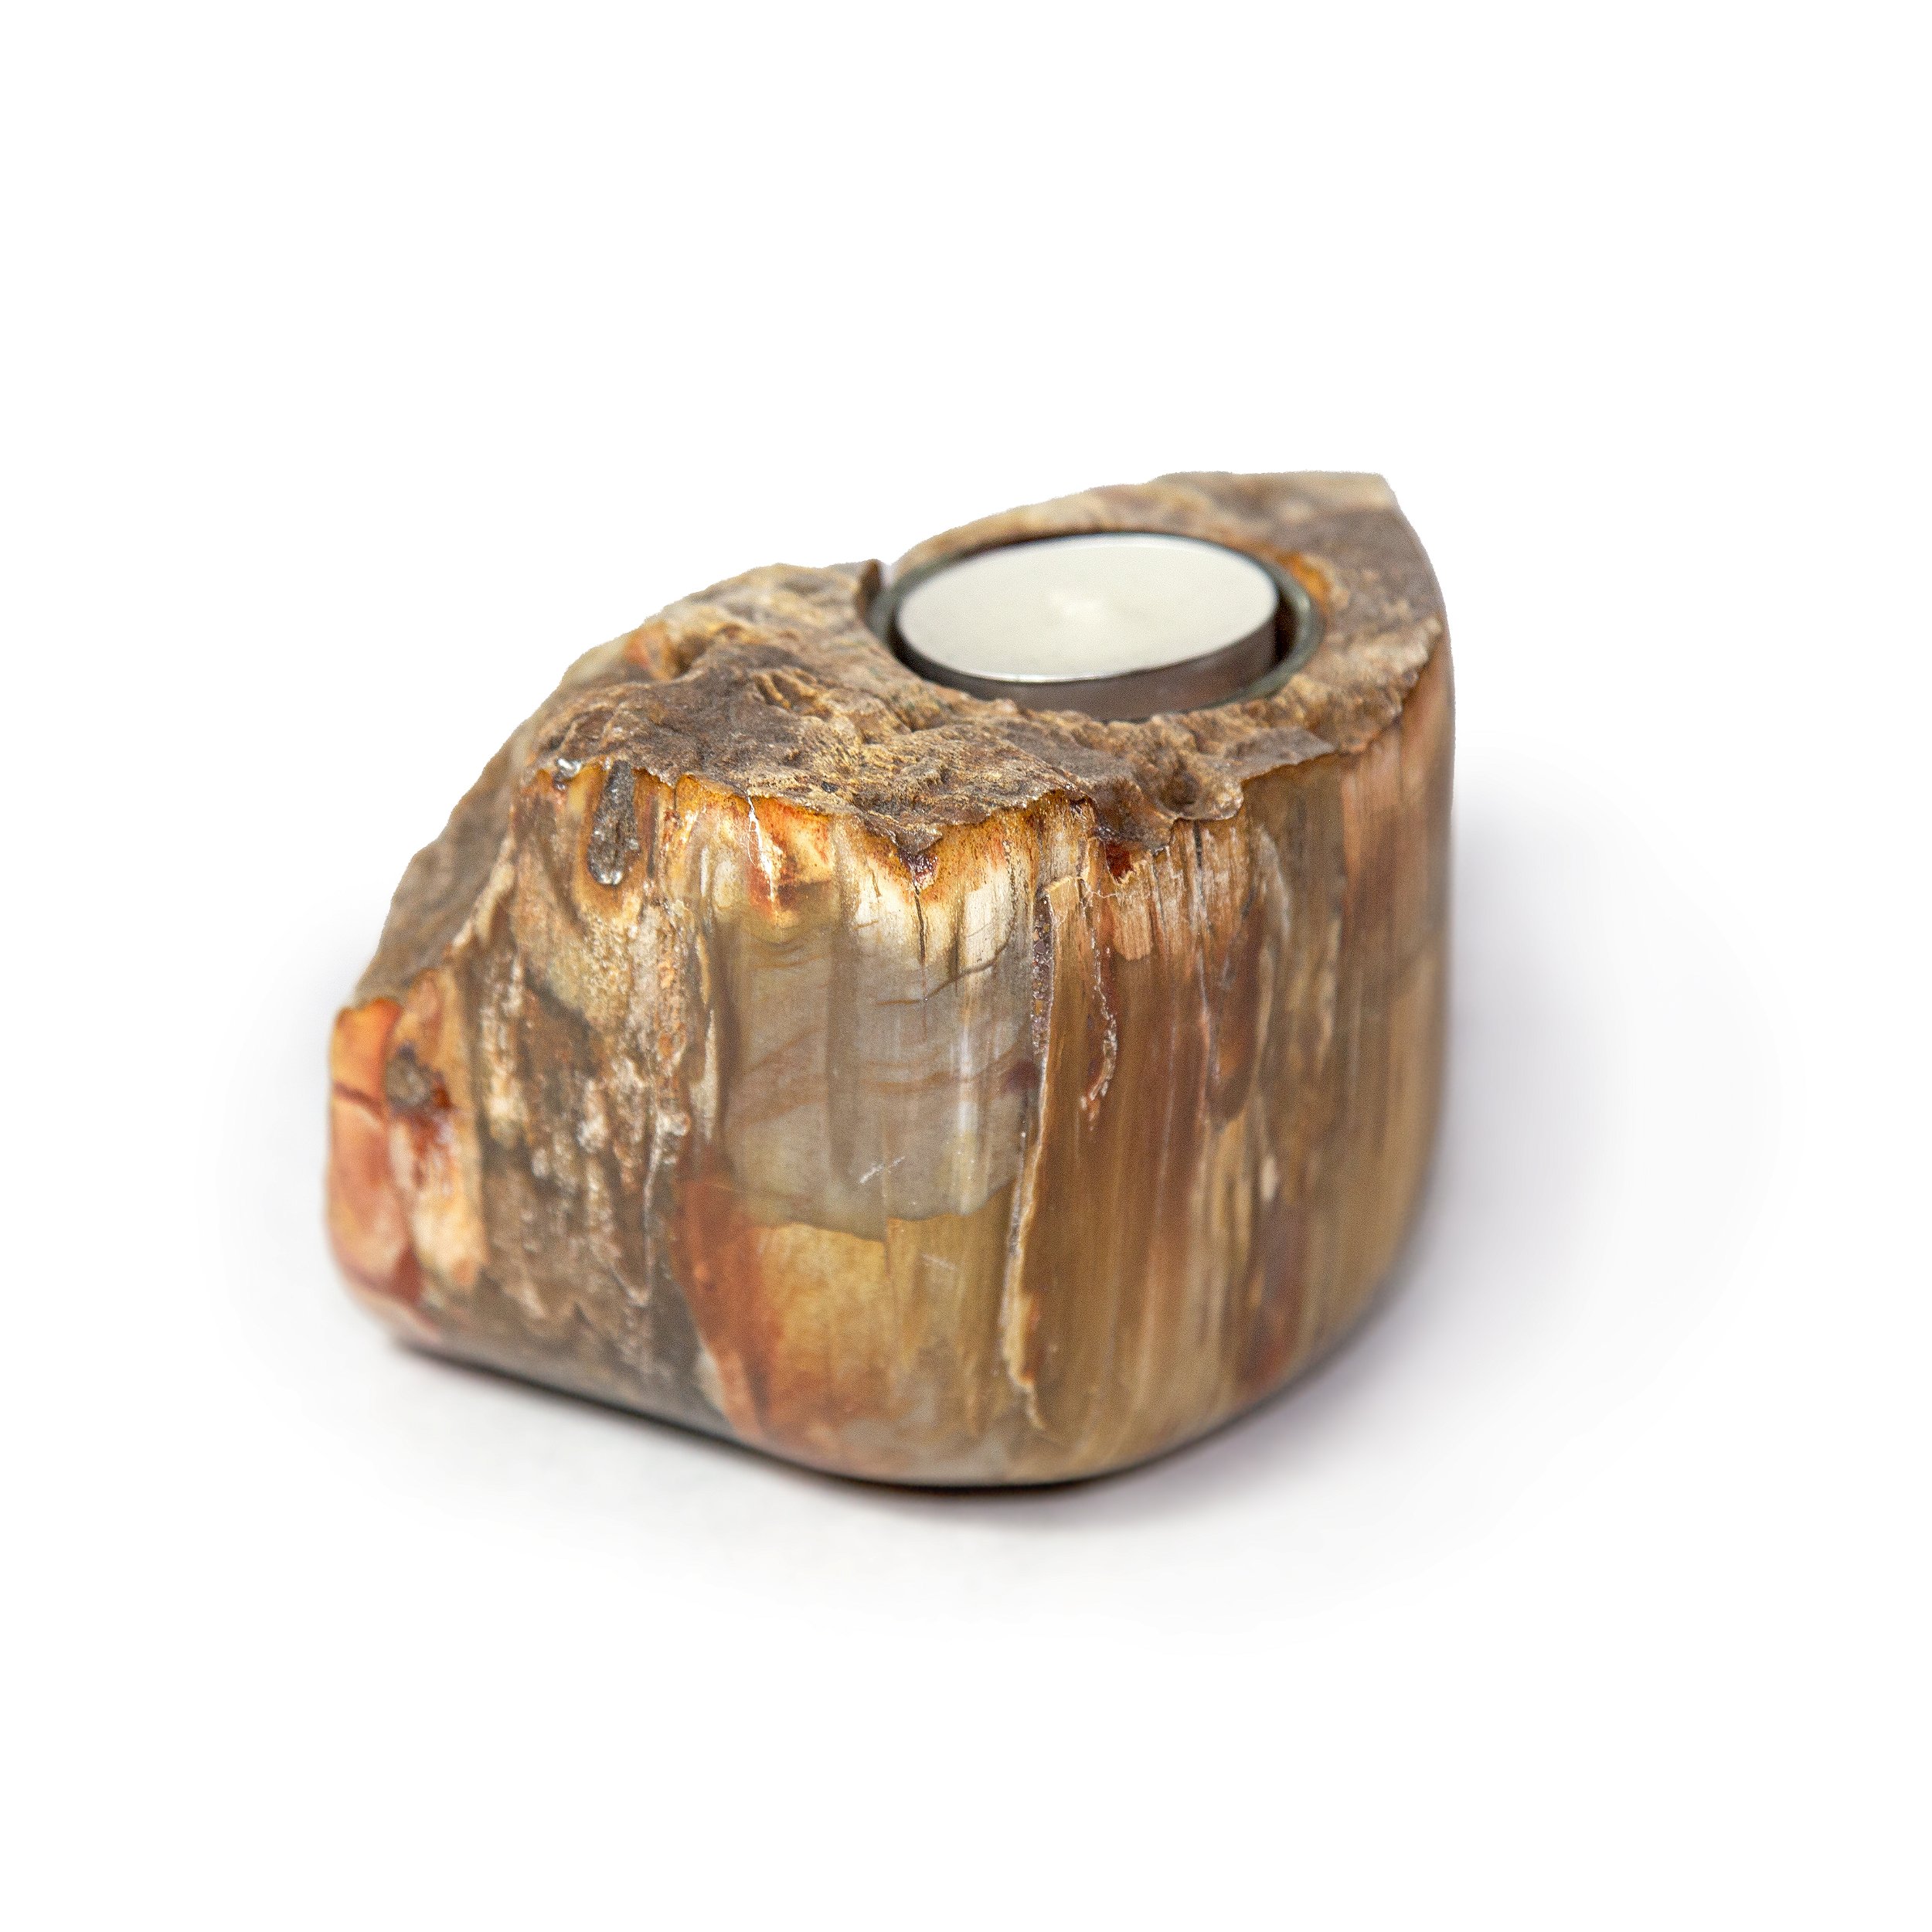 Madagascar Petrified Wood Corner Cut Log Candle Holder - Waterfall Shaped With A Single Candle At The Peak